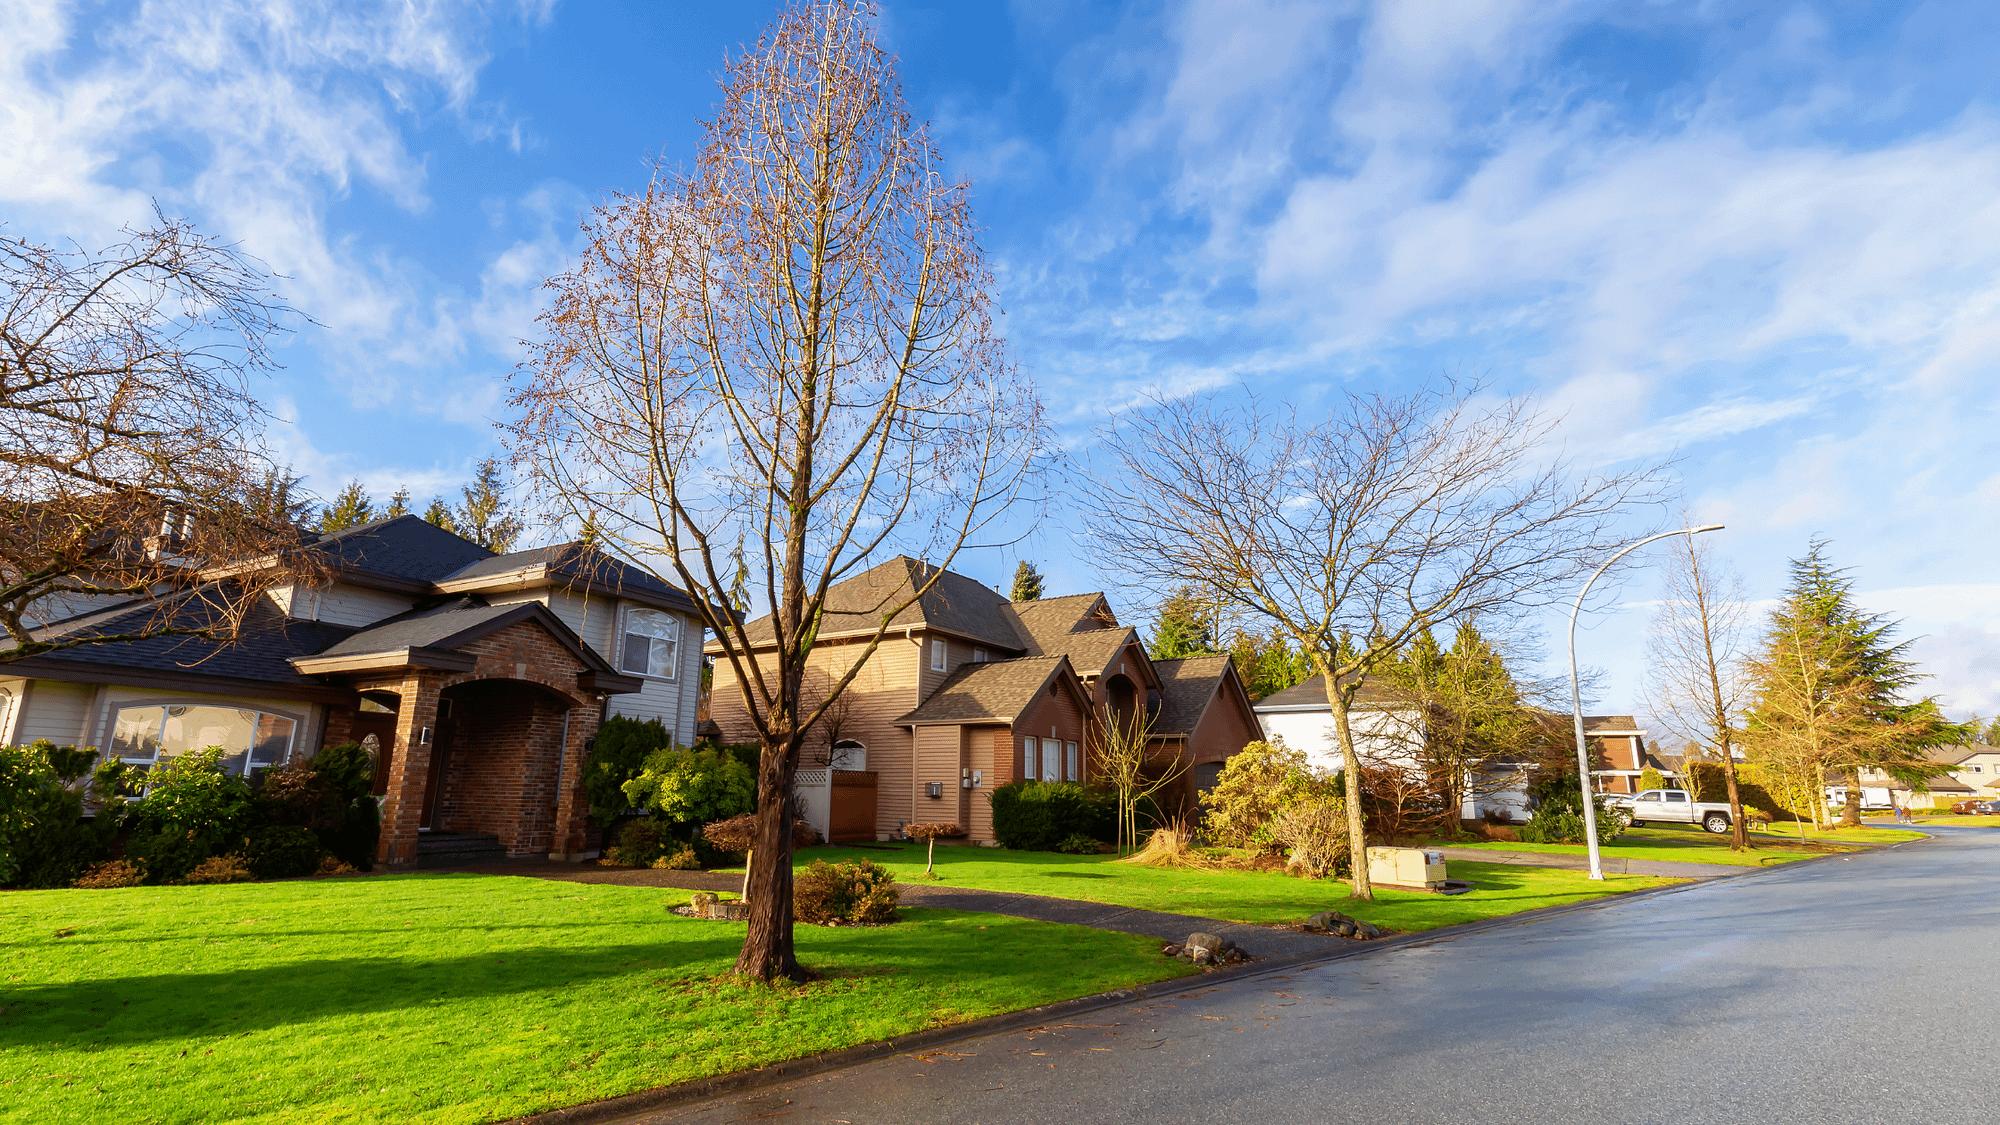 Record-Breaking New Listings In The Fraser Valley Not Enough To Match Insatiable Buyer Demand